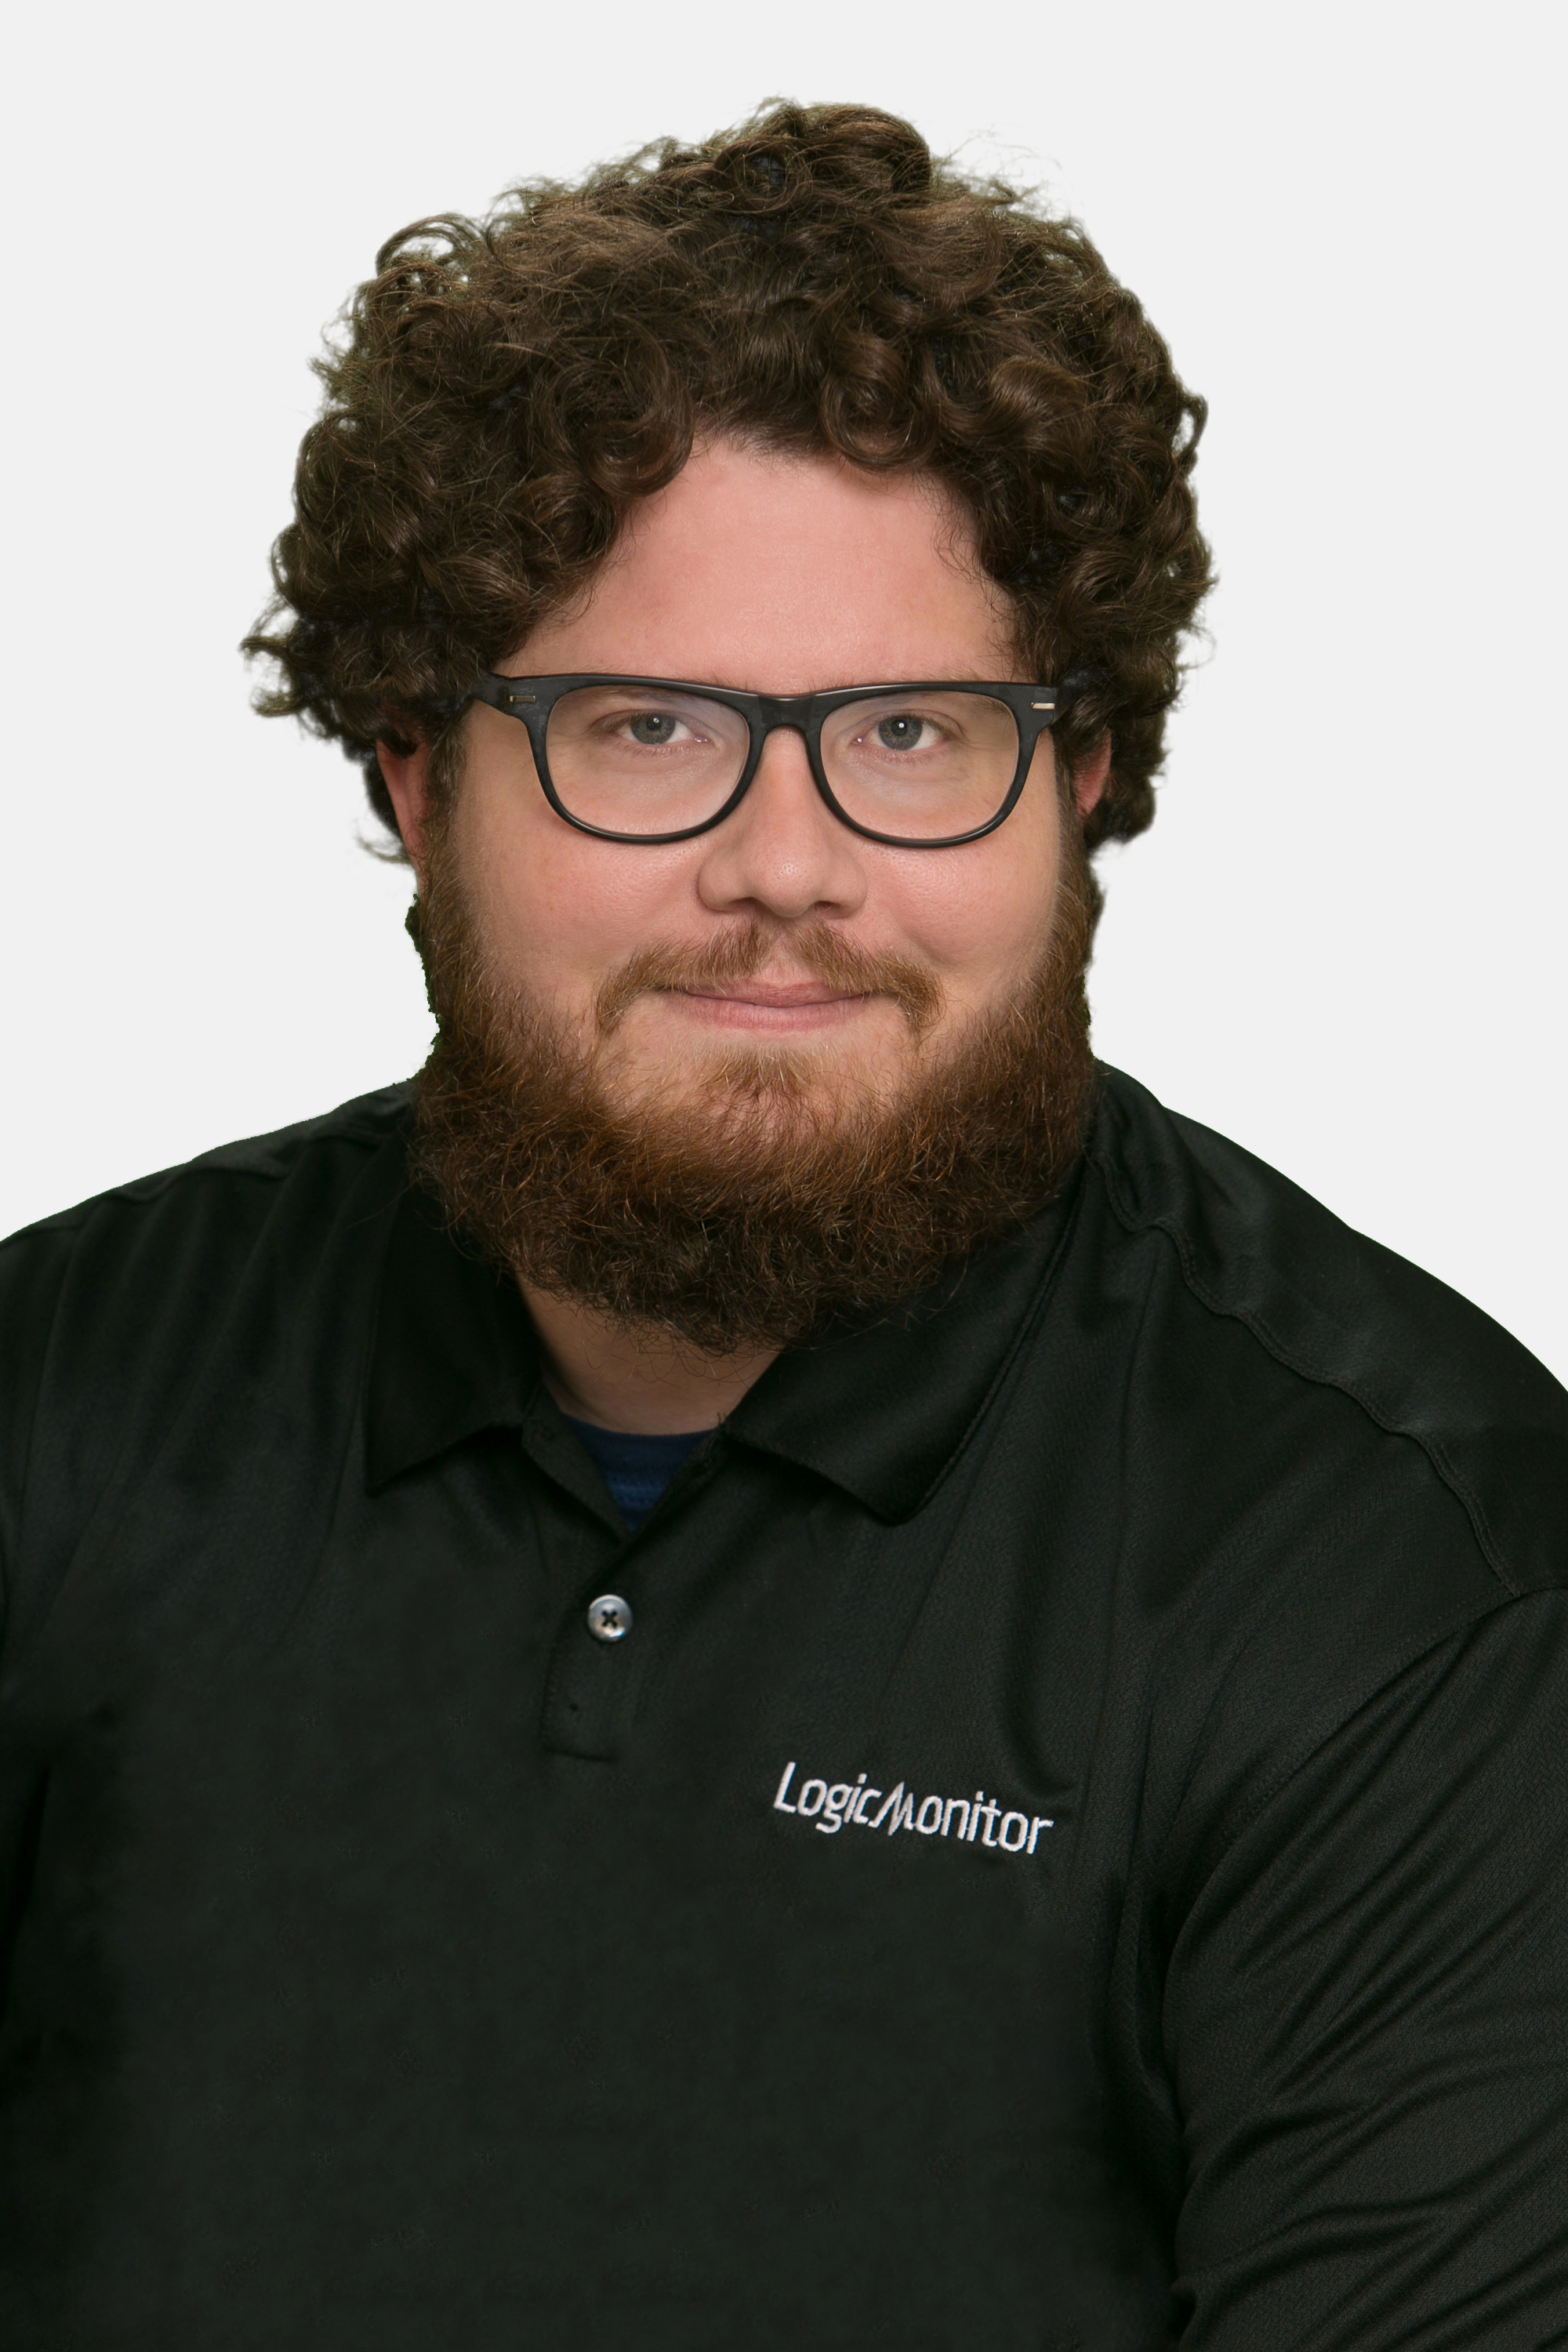 Julio Martinez-Thorpe is a Manager, Engineering in Santa Barbara, CA for LogicMonitor